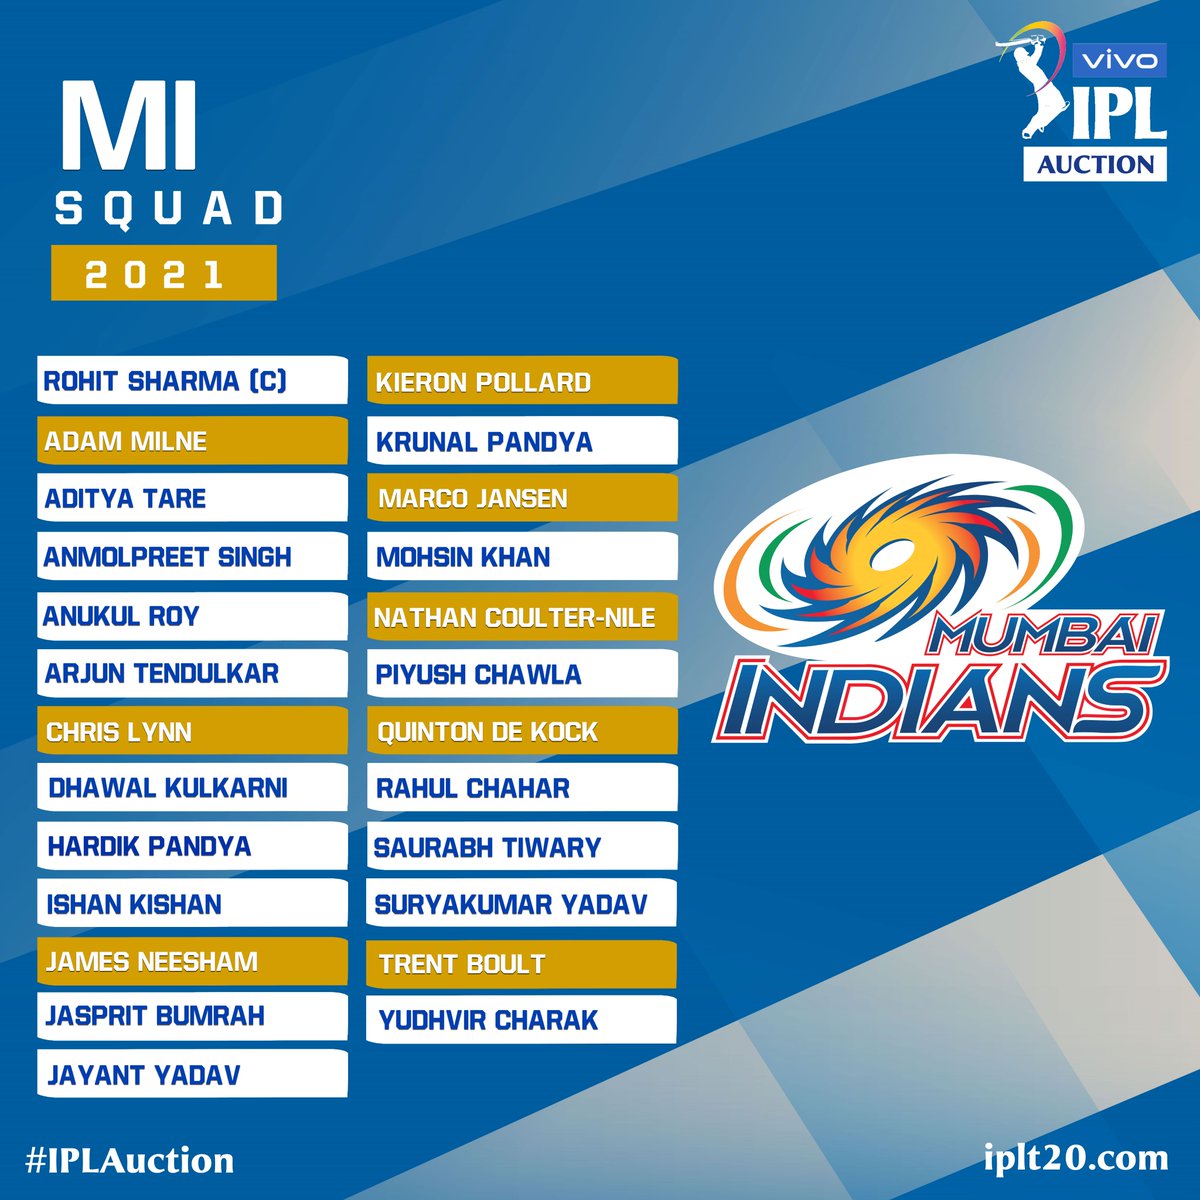 Check out how @mipaltan, @KKRiders, @DelhiCapitals & @ChennaiIPL stack up after the @Vivo_India #IPLAuction 2⃣0⃣2⃣1⃣ 👍 👇